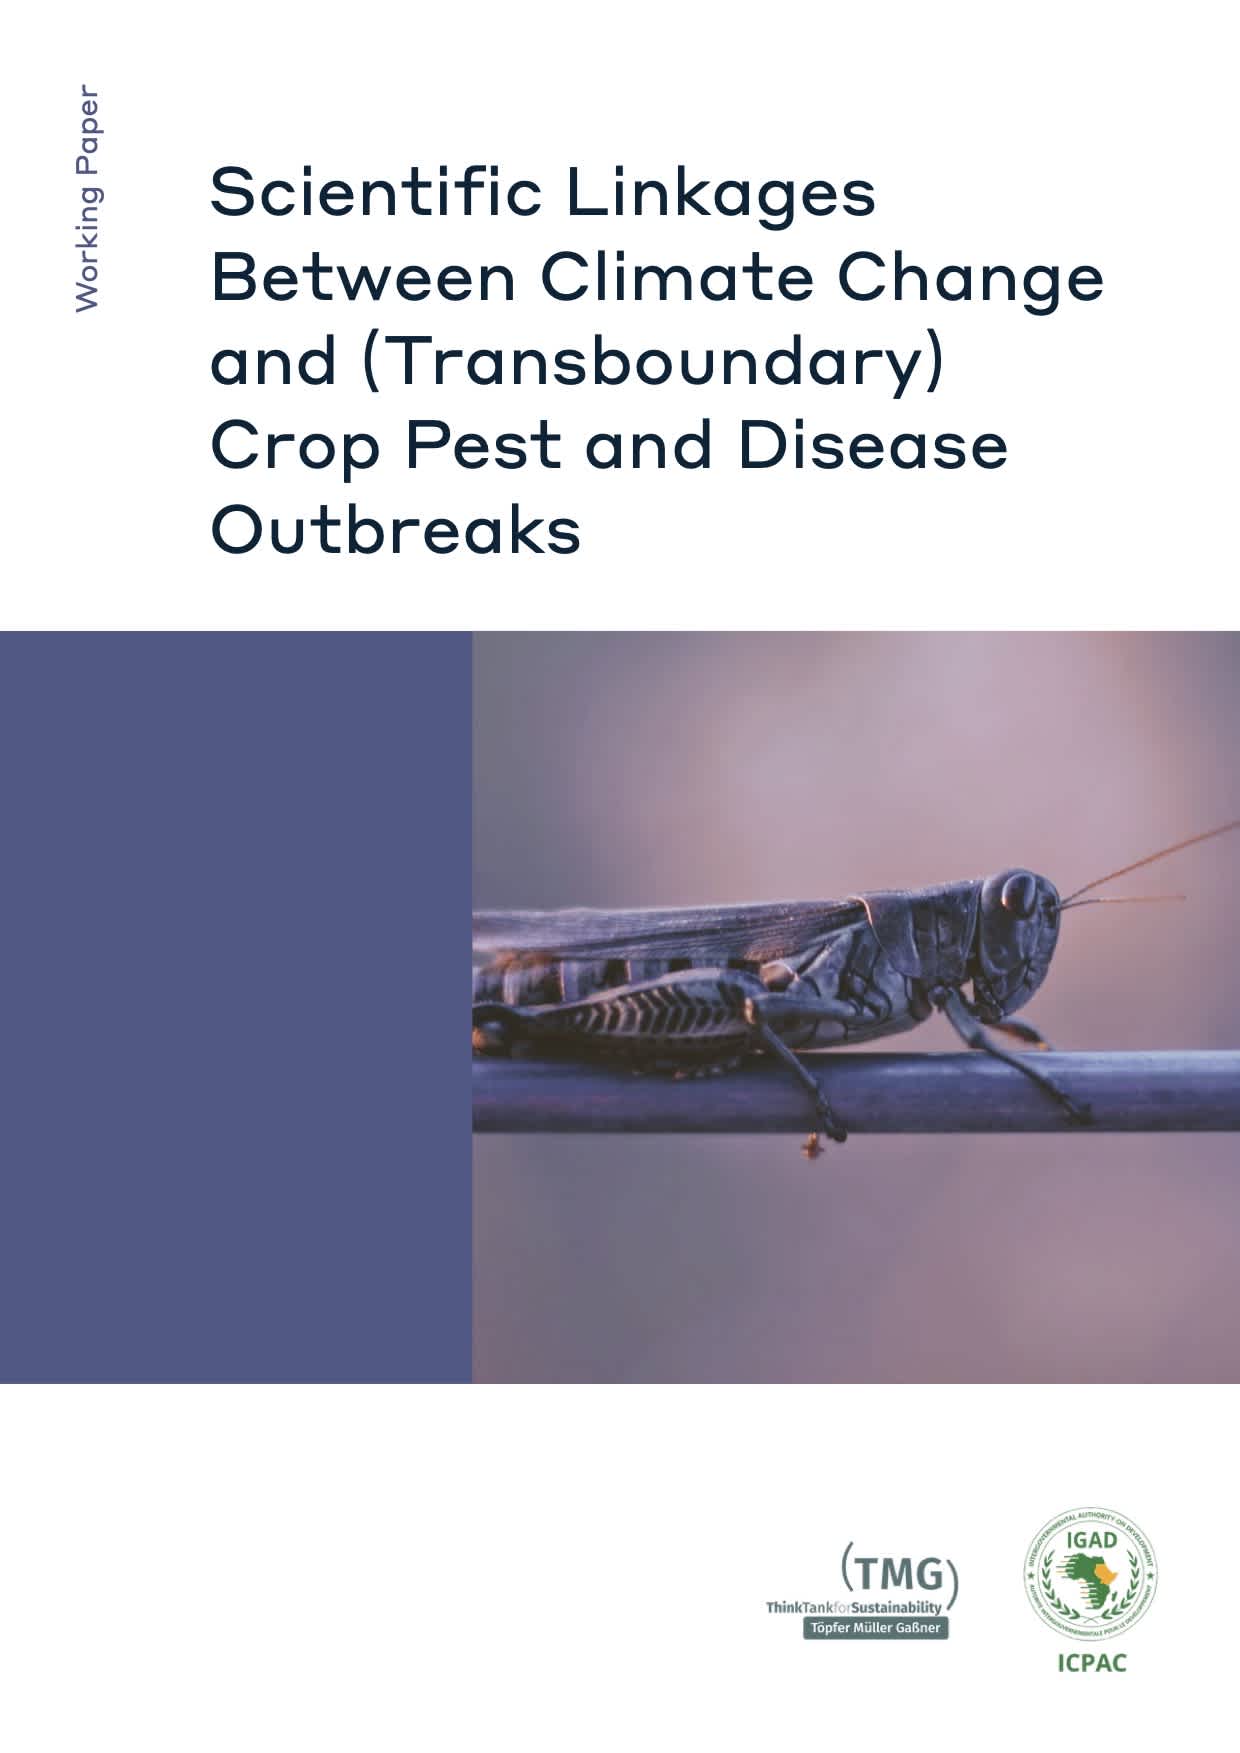 Scientific Linkages Between Climate Change and (Transboundary) Crop Pest and Disease Outbreaks